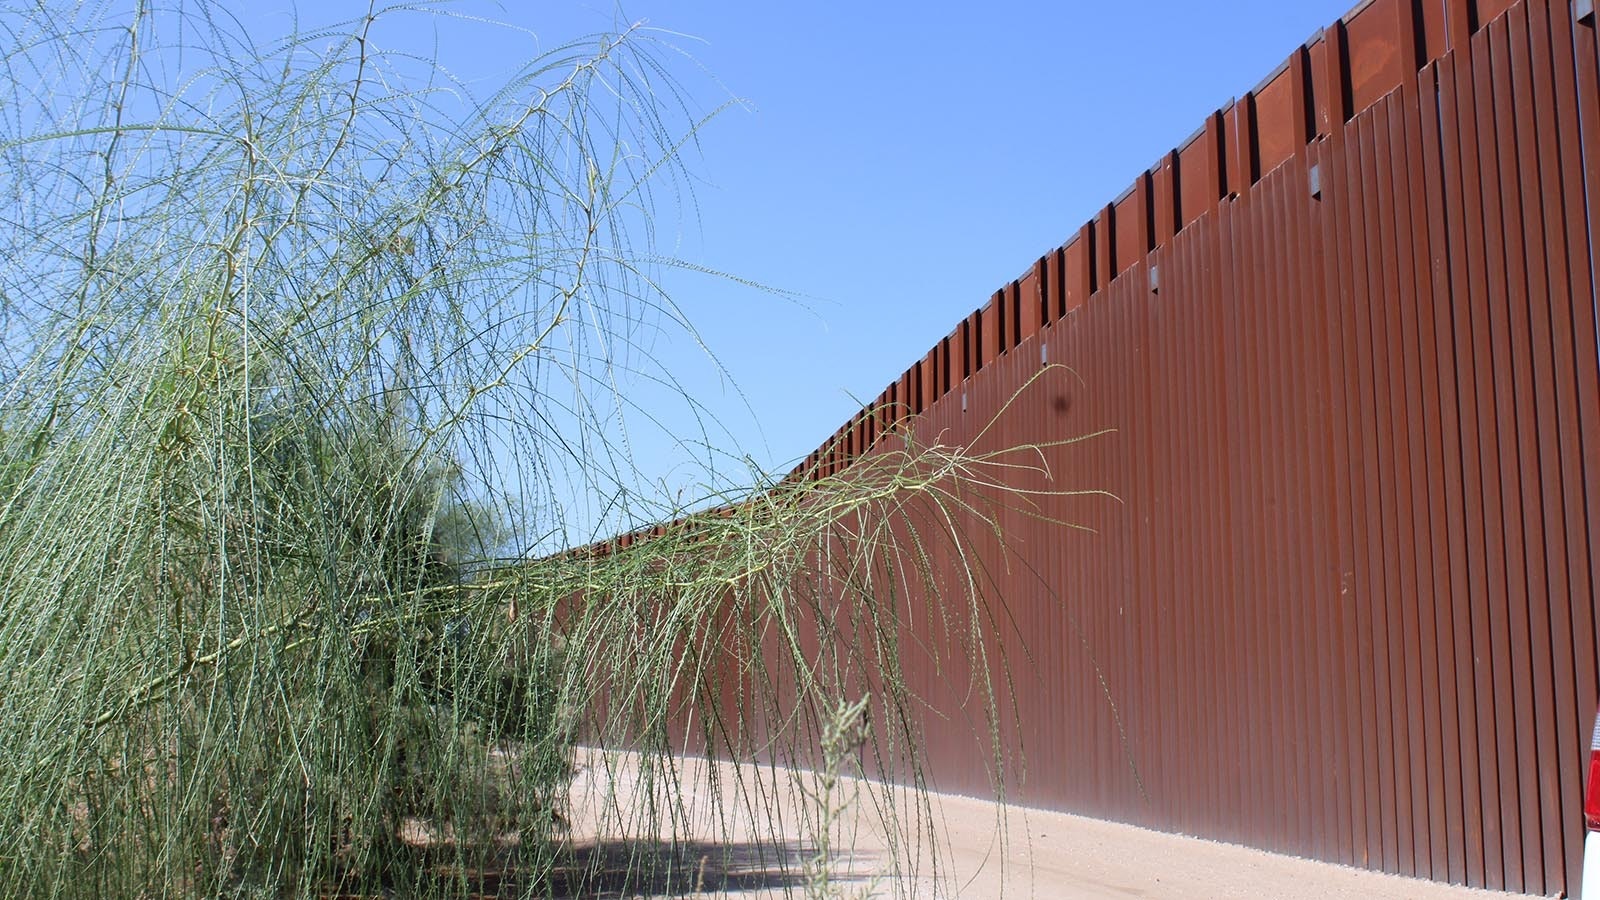 The southern border wall stretches around 400 miles and is about 30 feet tall, but a roughly 8-mile gap exists in the wall in Yuma, Arizona.